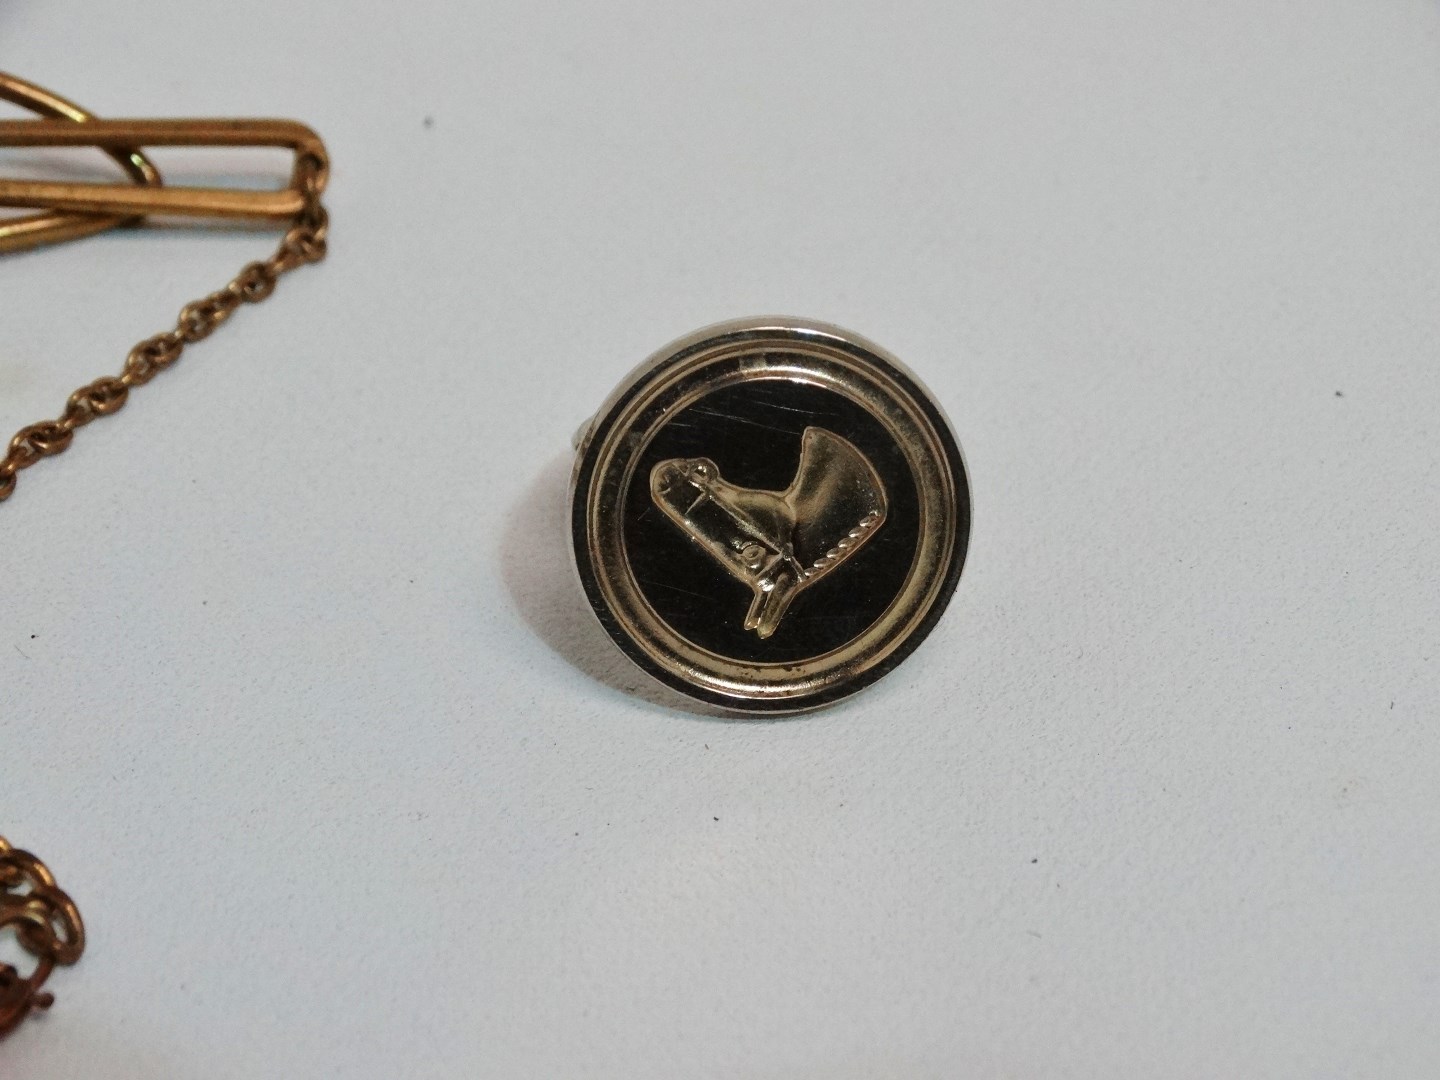 A West Indies British Guiana gold 'dollar' souvenir madalet - mounted on a suspension ring, undated, - Image 6 of 7